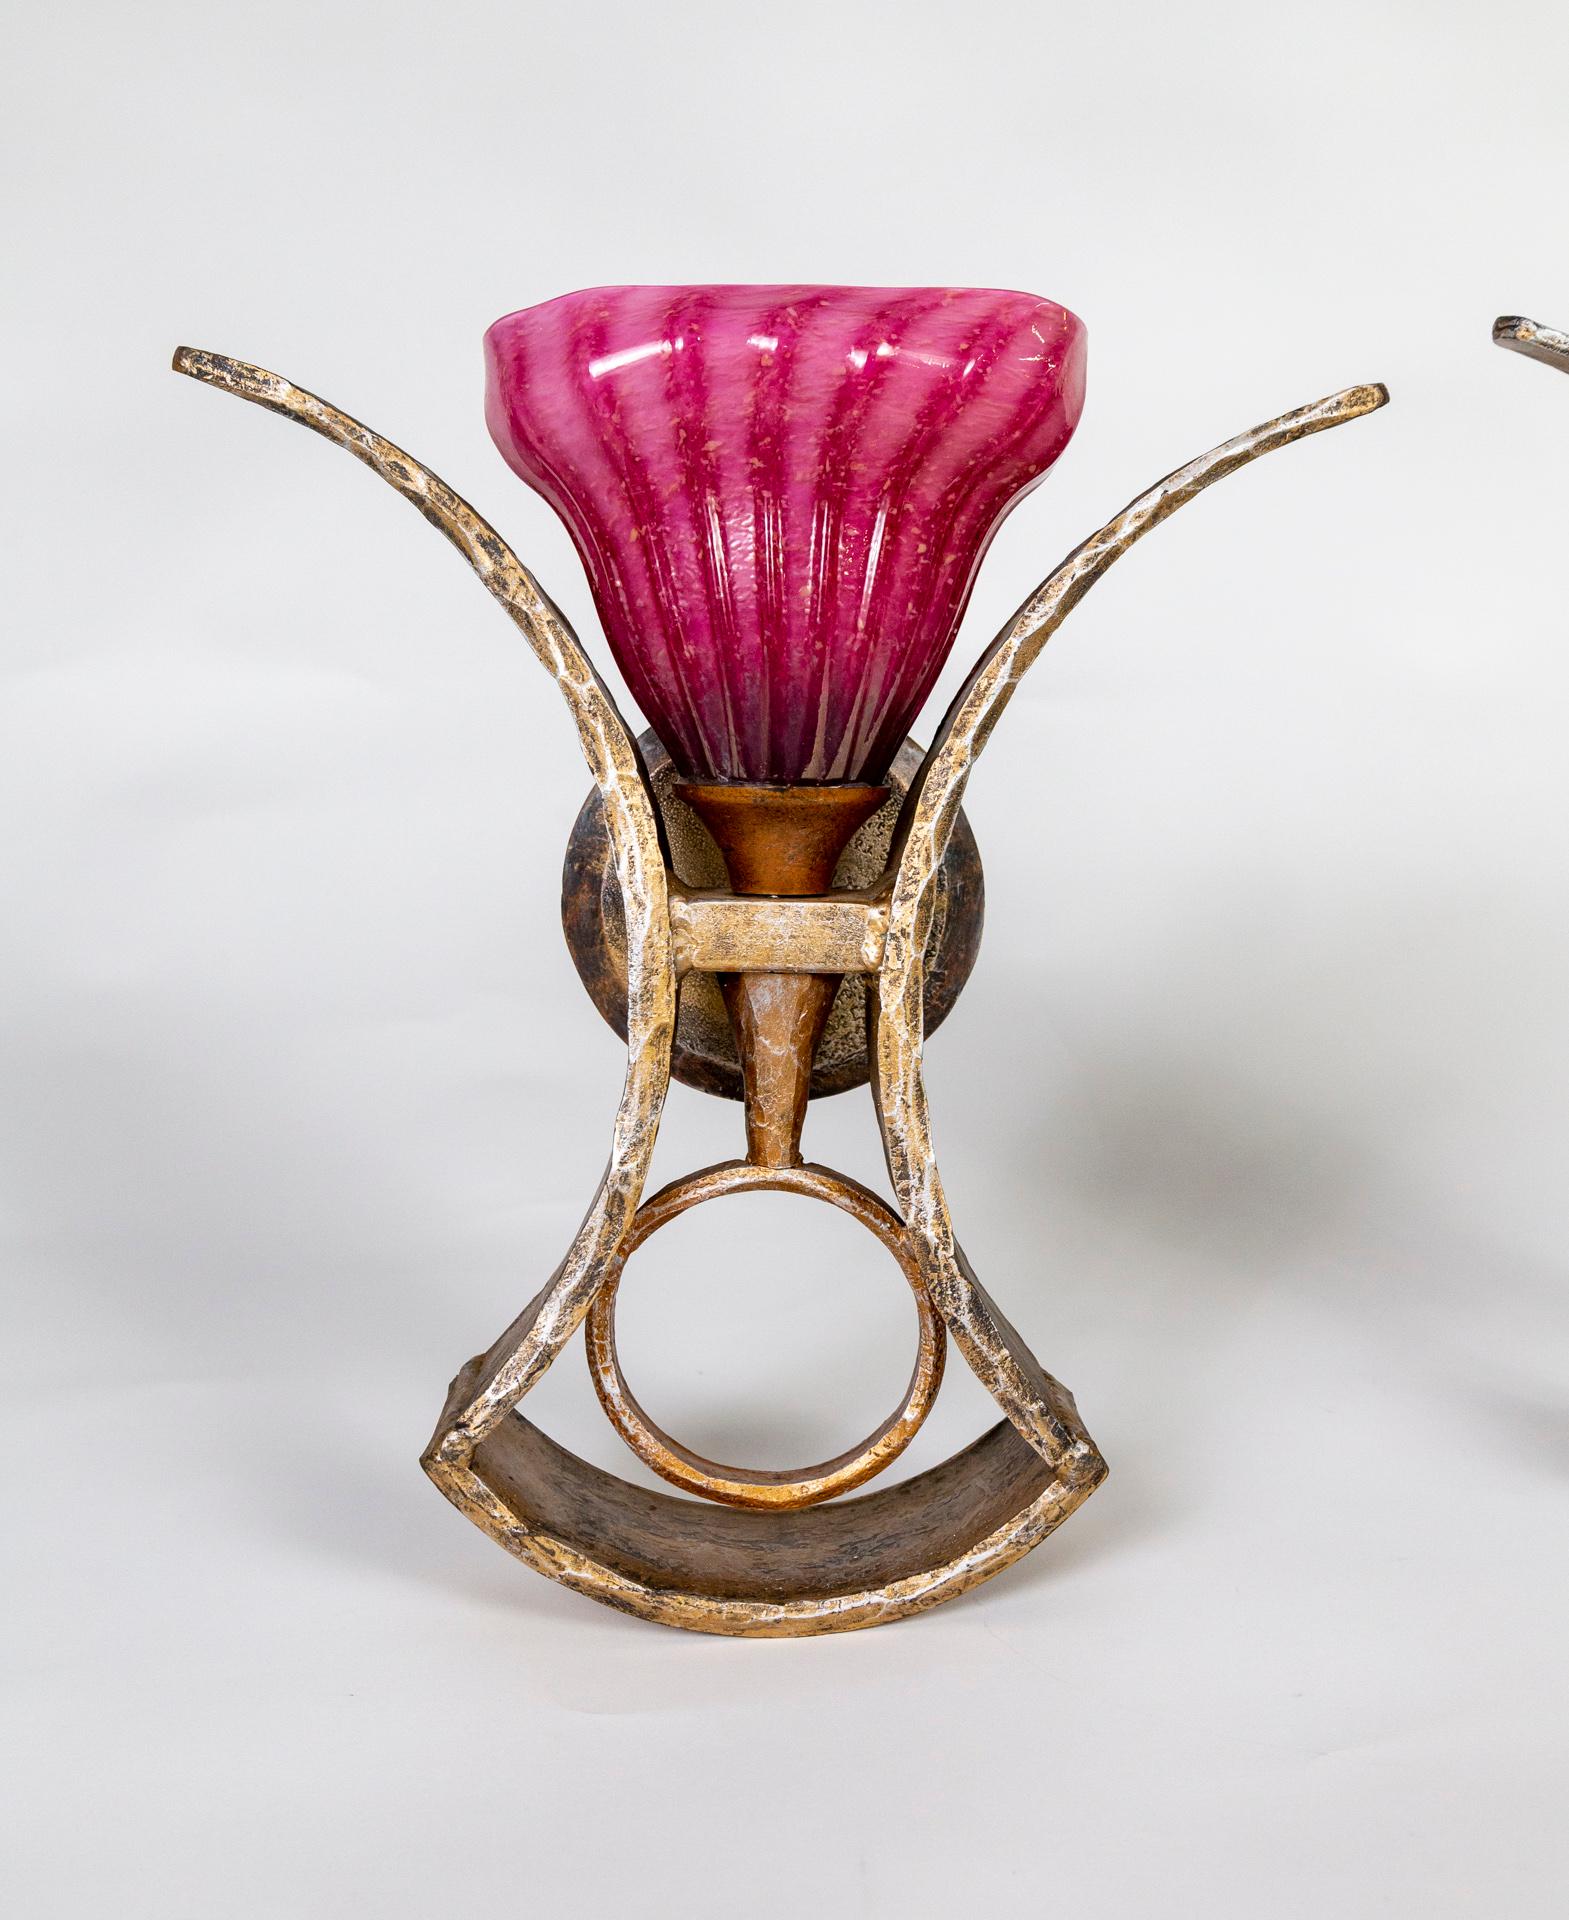 Modern Forged Sculptural Sconces w/ Magenta Blown Glass Shades, Morrison Lighting, Pair For Sale